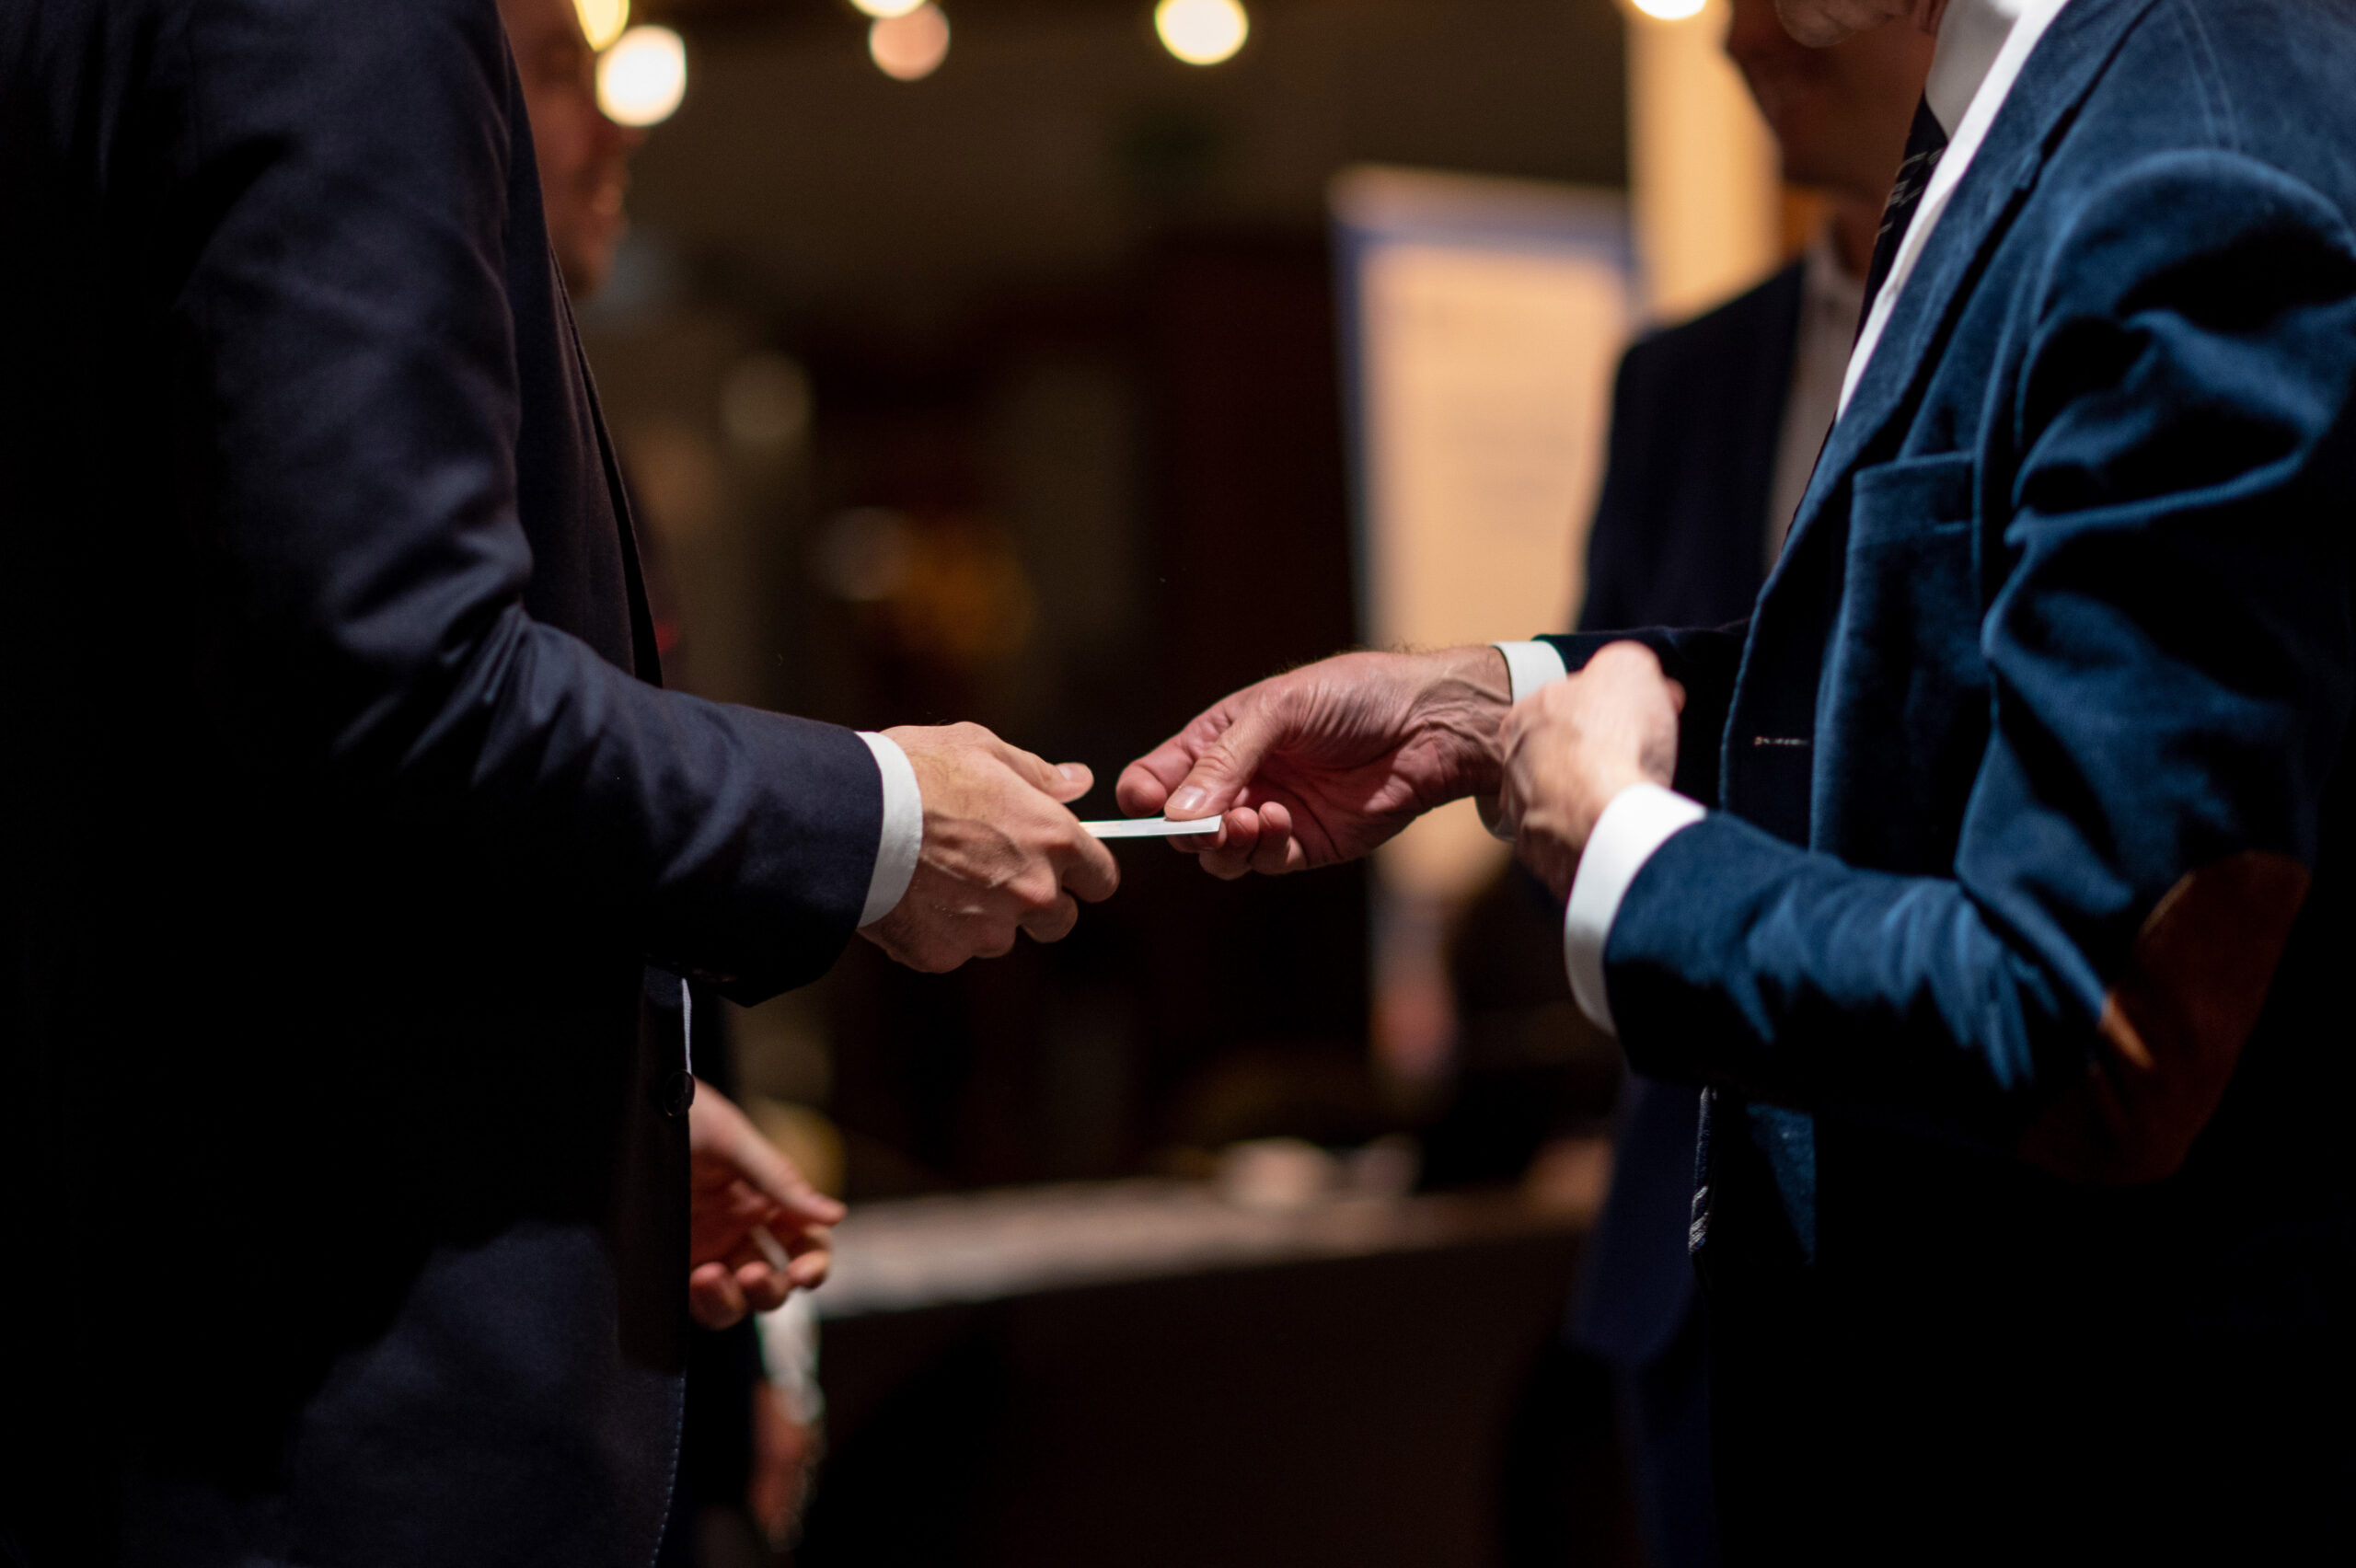 Men exchanging business cards